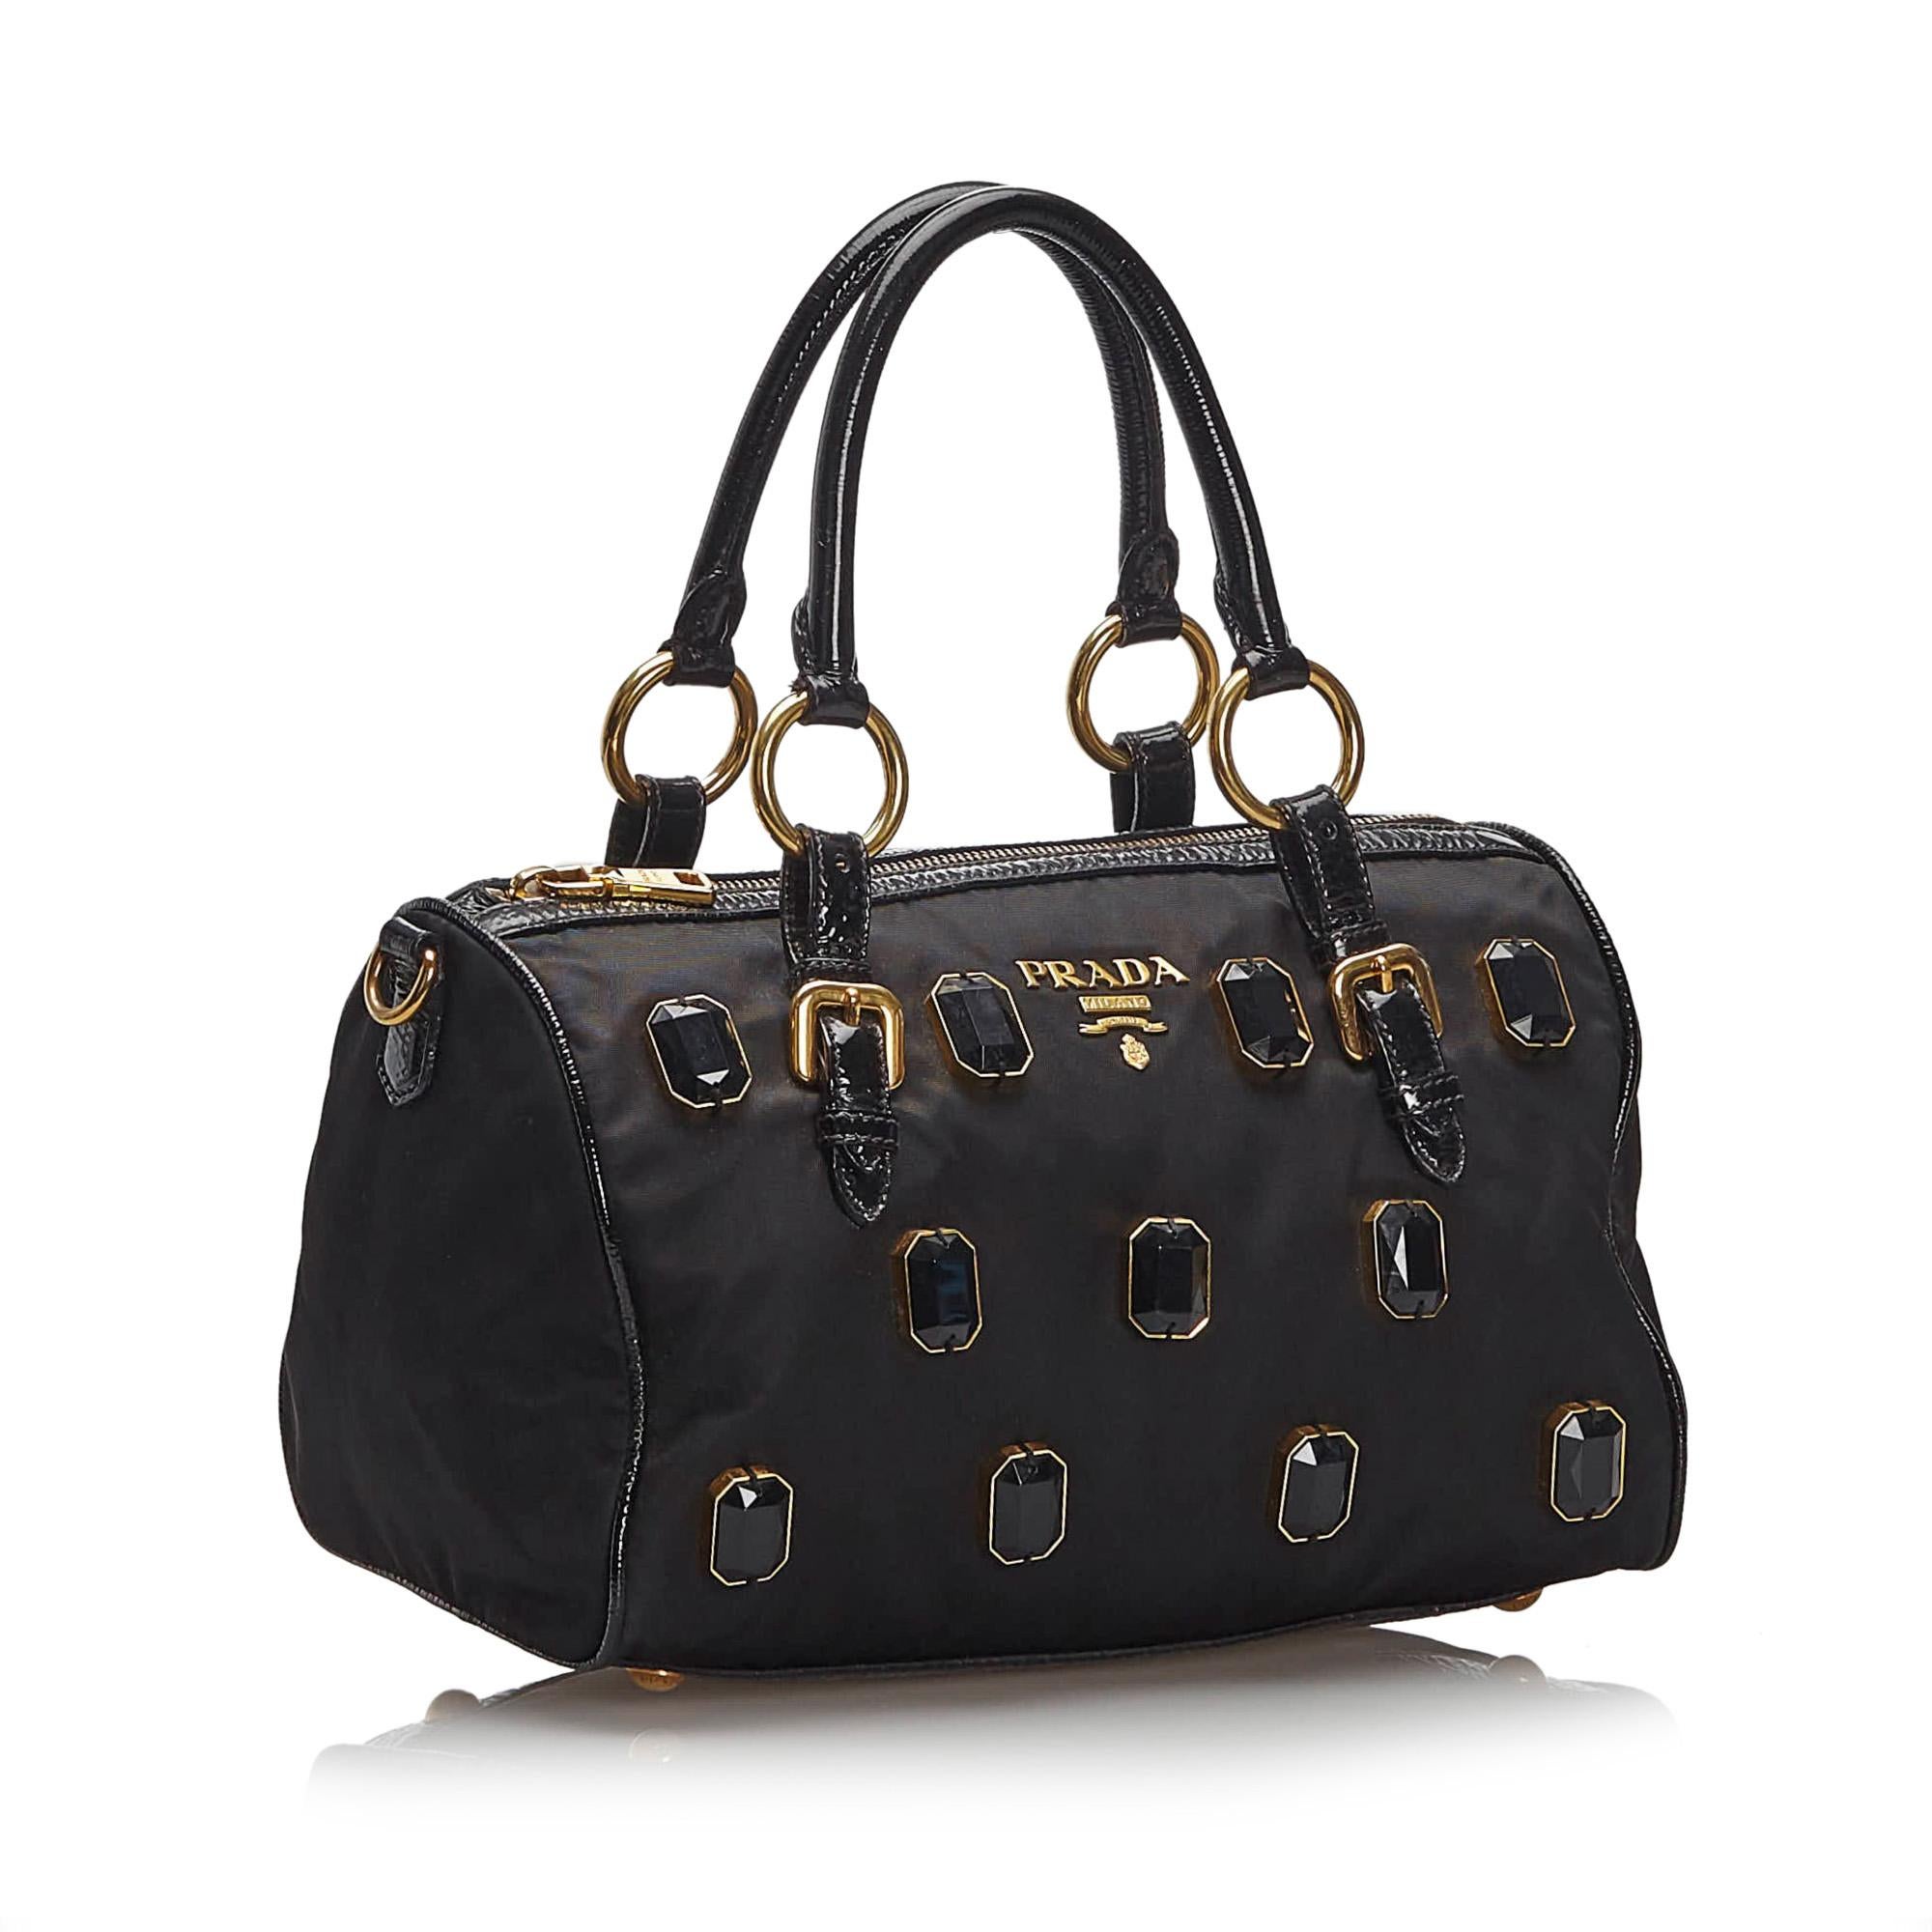 The Pietre handbag features an embellished nylon body with gem embellishments , rolled leather handles, a top zip closure, and an interior zip pocket. It carries as AB condition rating.

Inclusions: 
Dust Bag
Dimensions:
Length: 20.00 cm
Width: